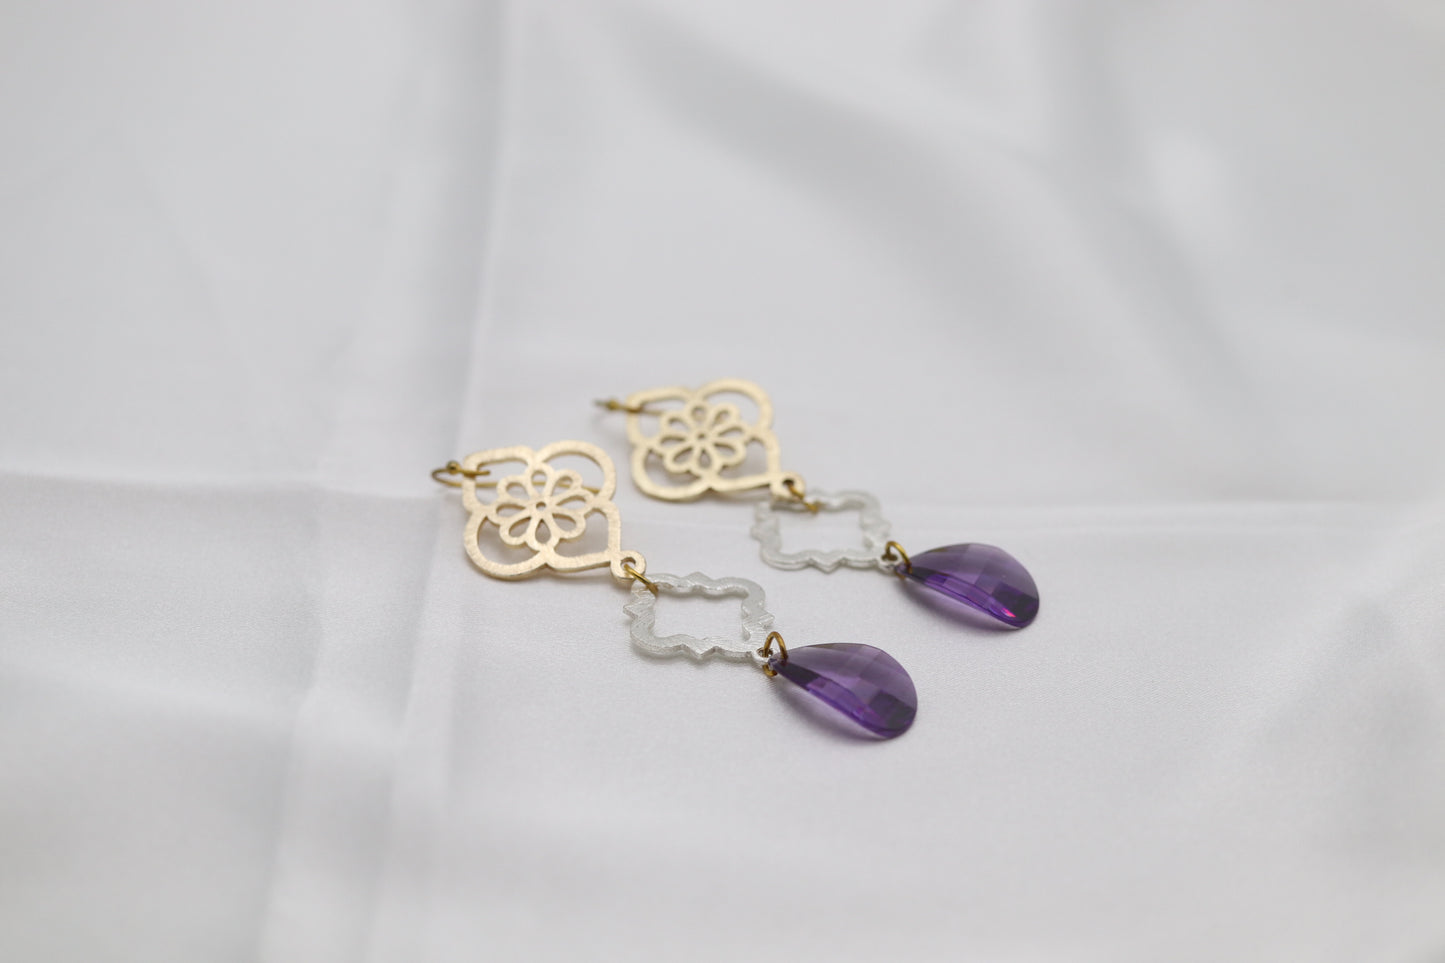 Filigree Dangling Purple Stone Earrings Made With Faceted Fancy Cut Cubics